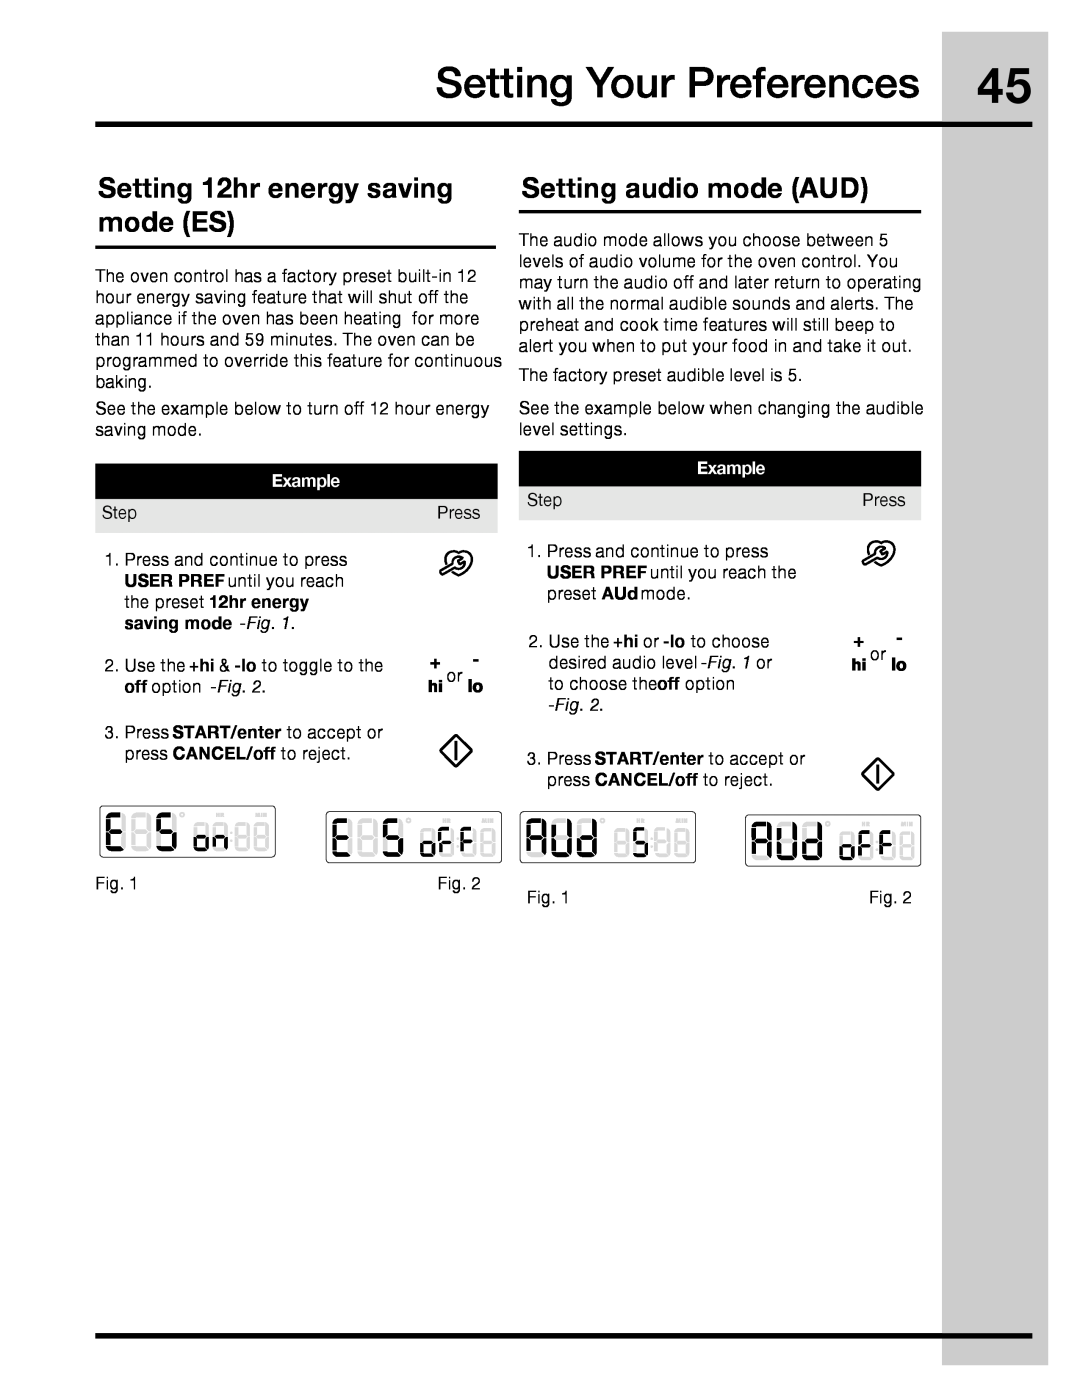 Electrolux 316471113 Setting 12hr energy saving mode ES, Setting audio mode AUD, off option -Fig, Setting Your Preferences 